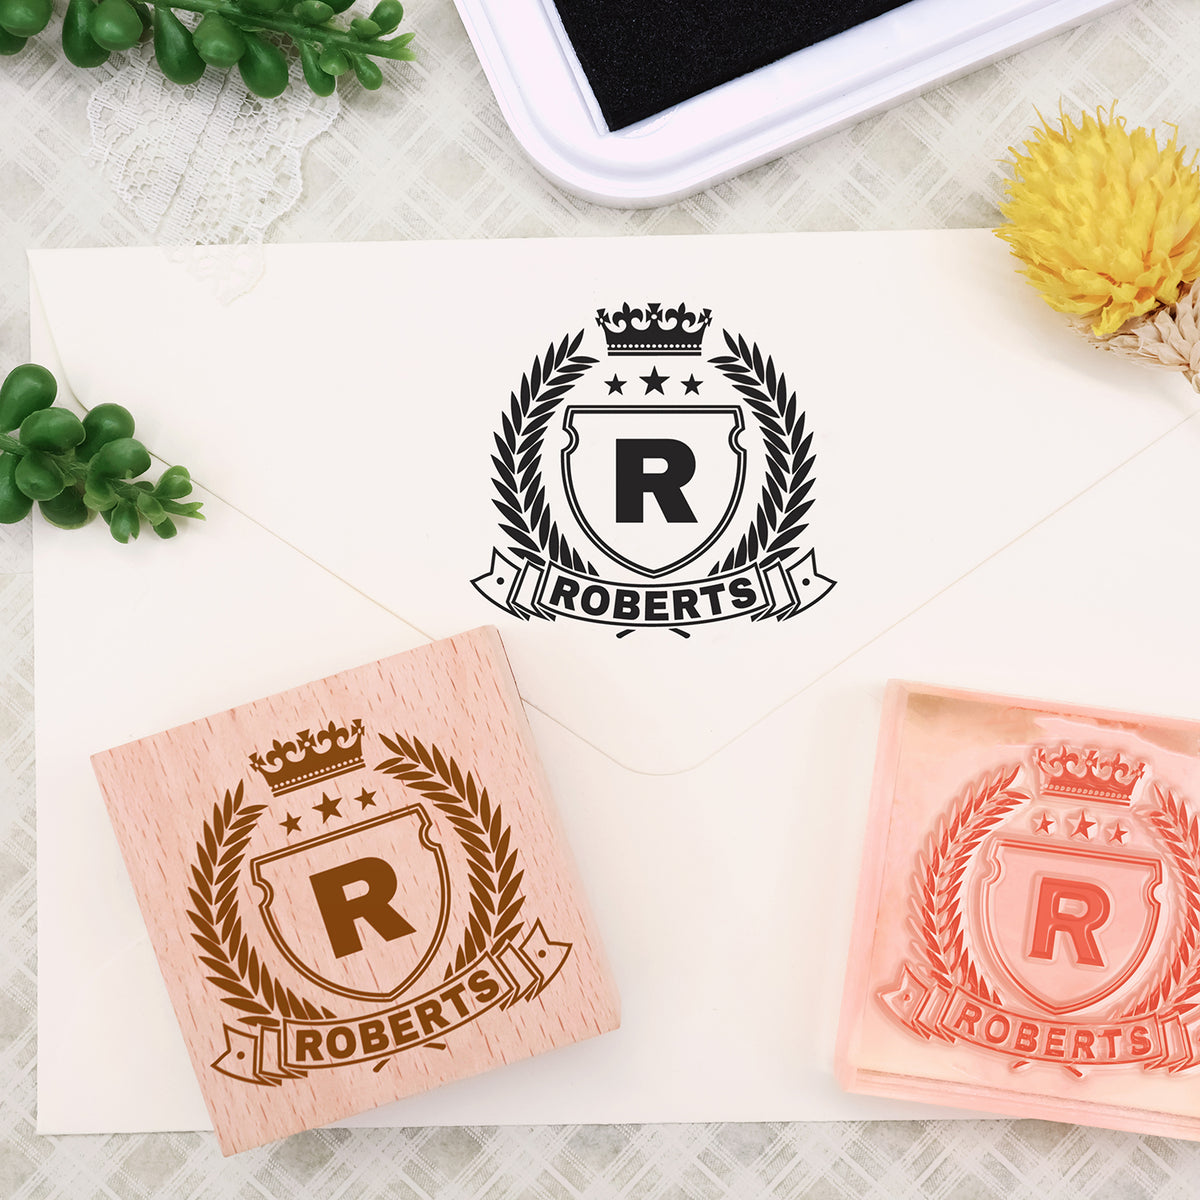 Stamp Collection Rubber Stamp Design Company Stamp Custom Art Rubber Stamps  Rubber Stamp Design Template (Download Now) 